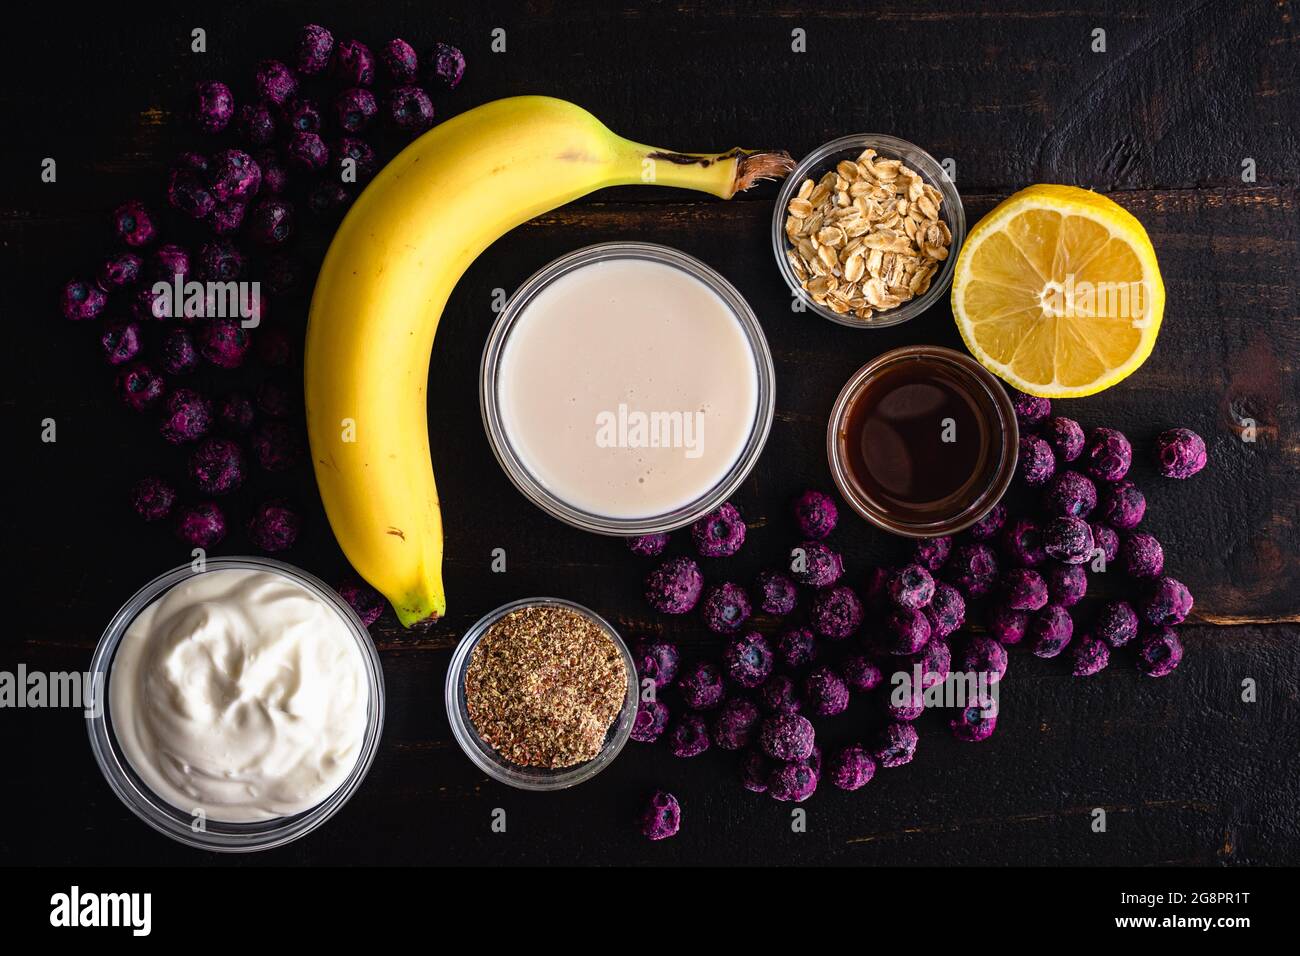 Healthy Blueberry Muffin Breakfast Smoothie Ingredients: Raw smoothie ingredients including frozen blueberries, bananas, and rolled oats Stock Photo